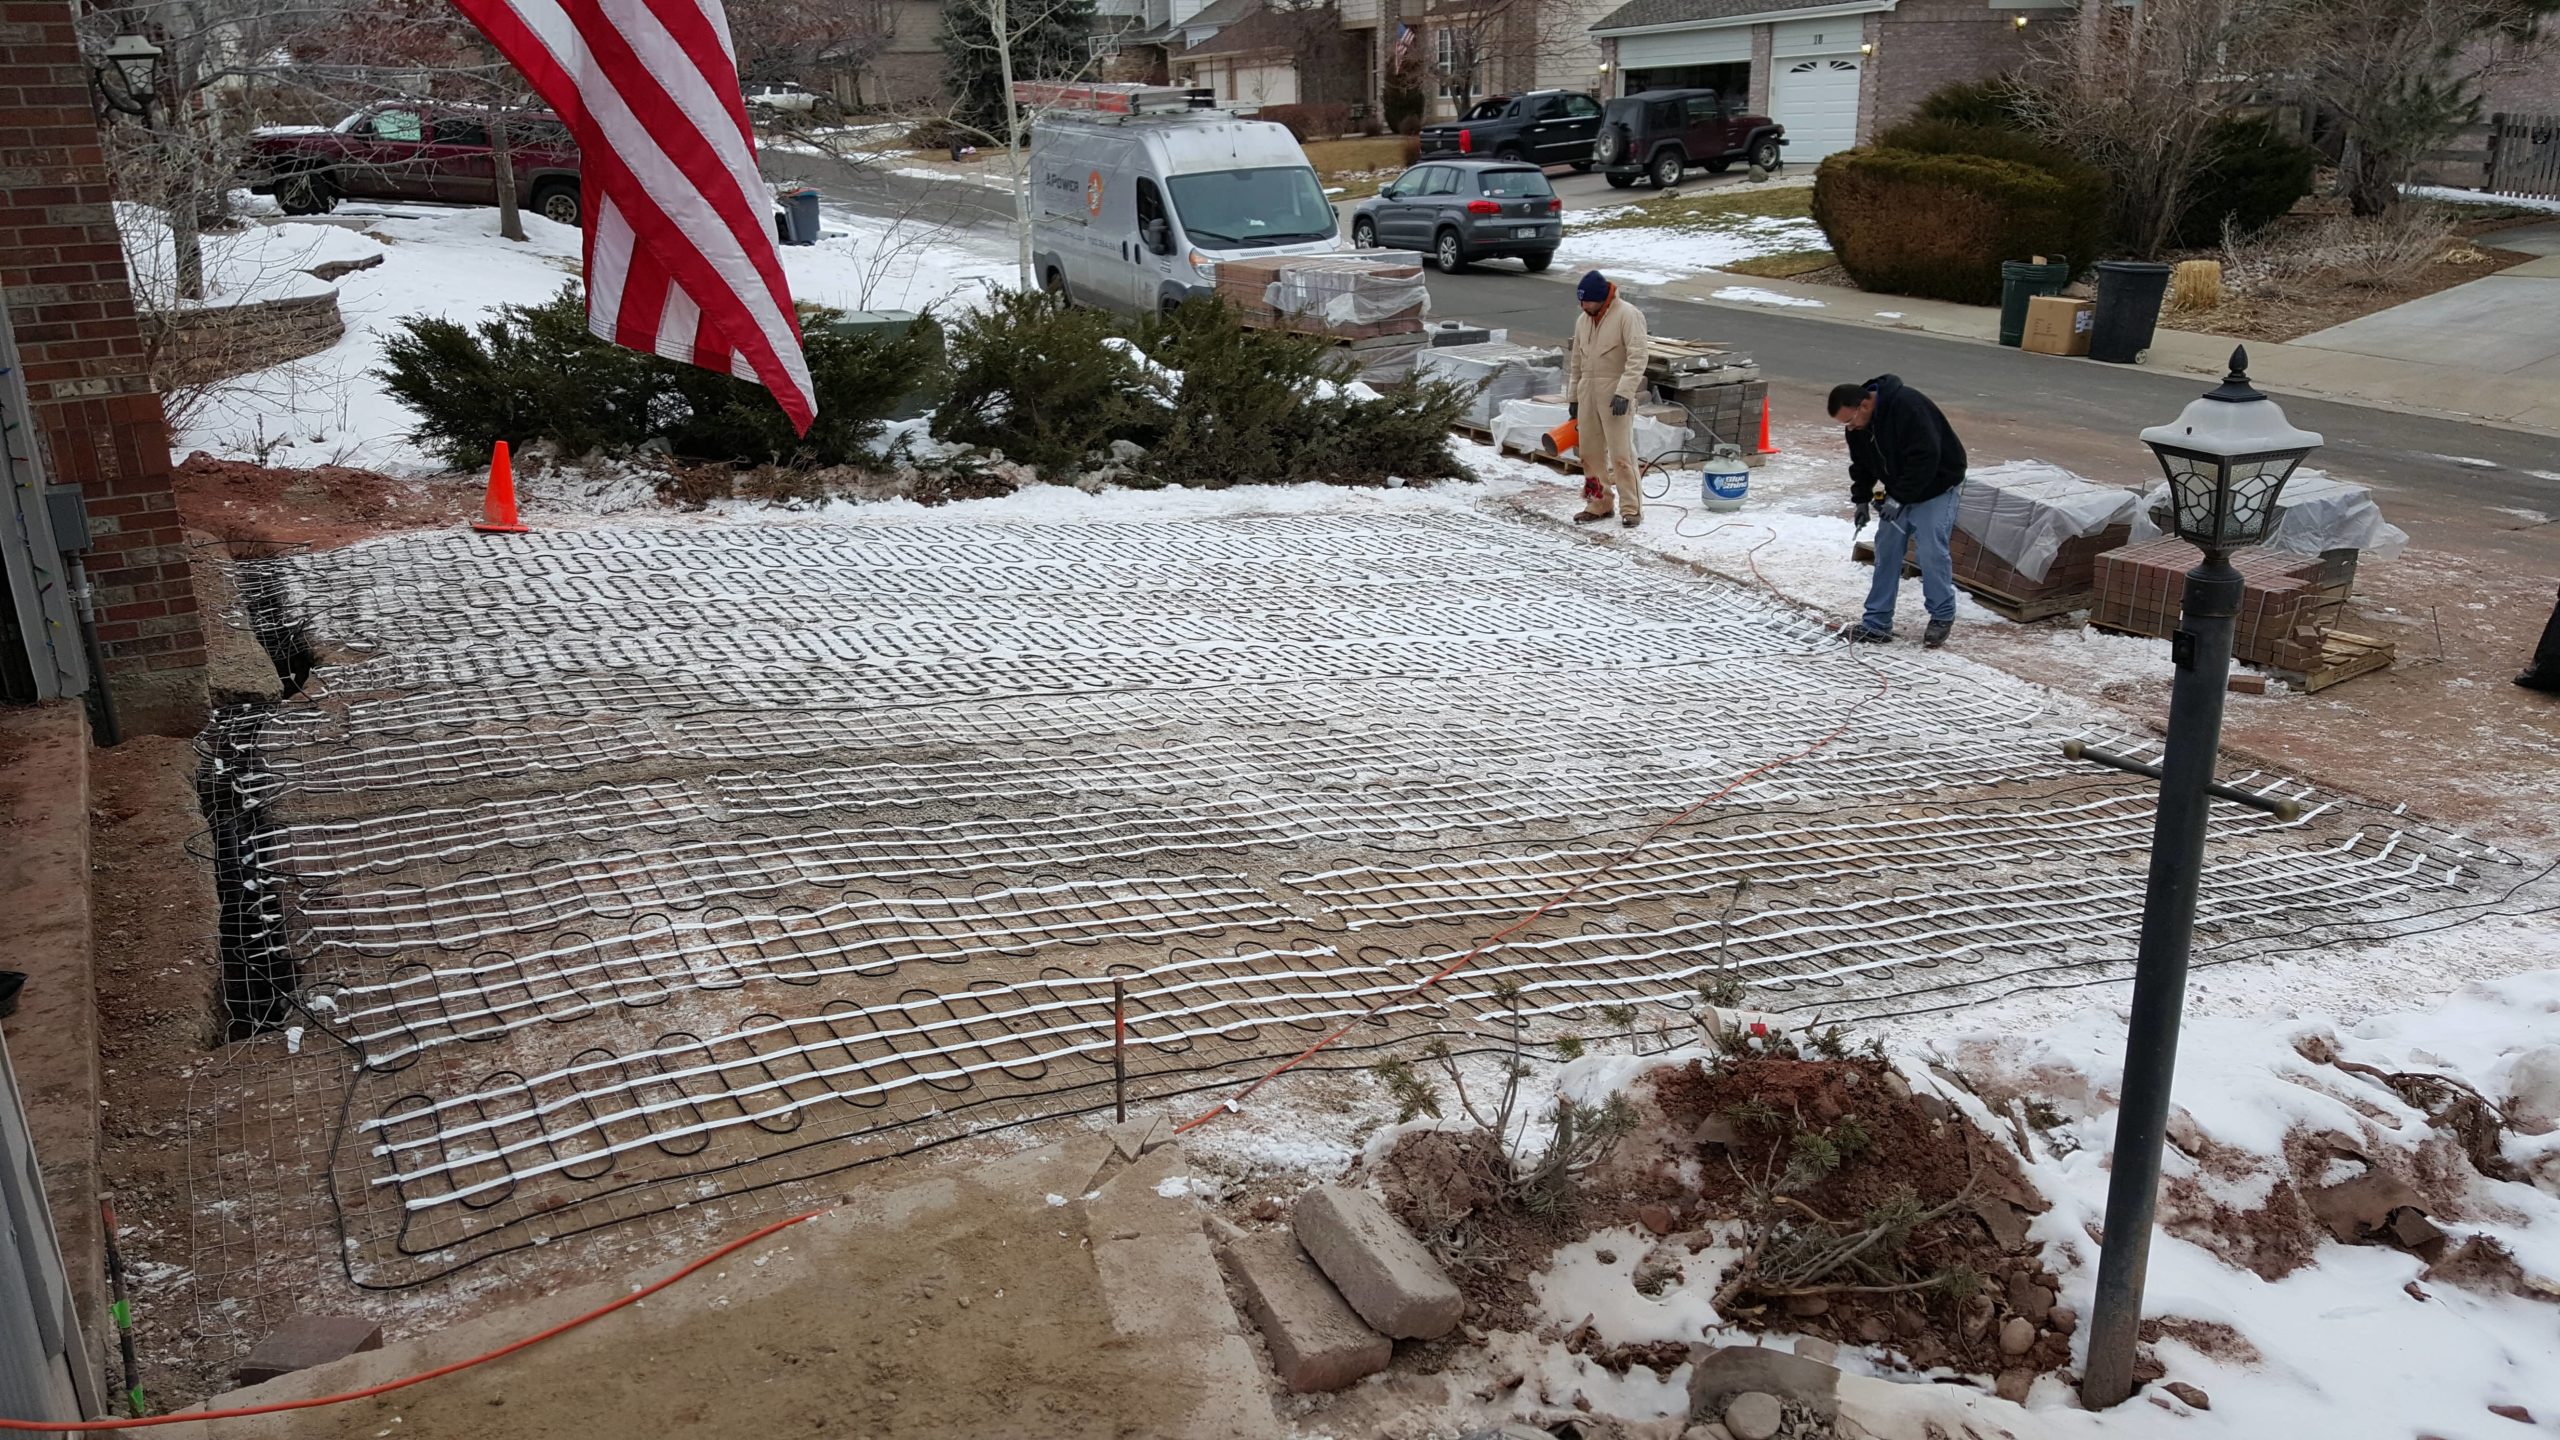 electricians installing heated floors on a driveway